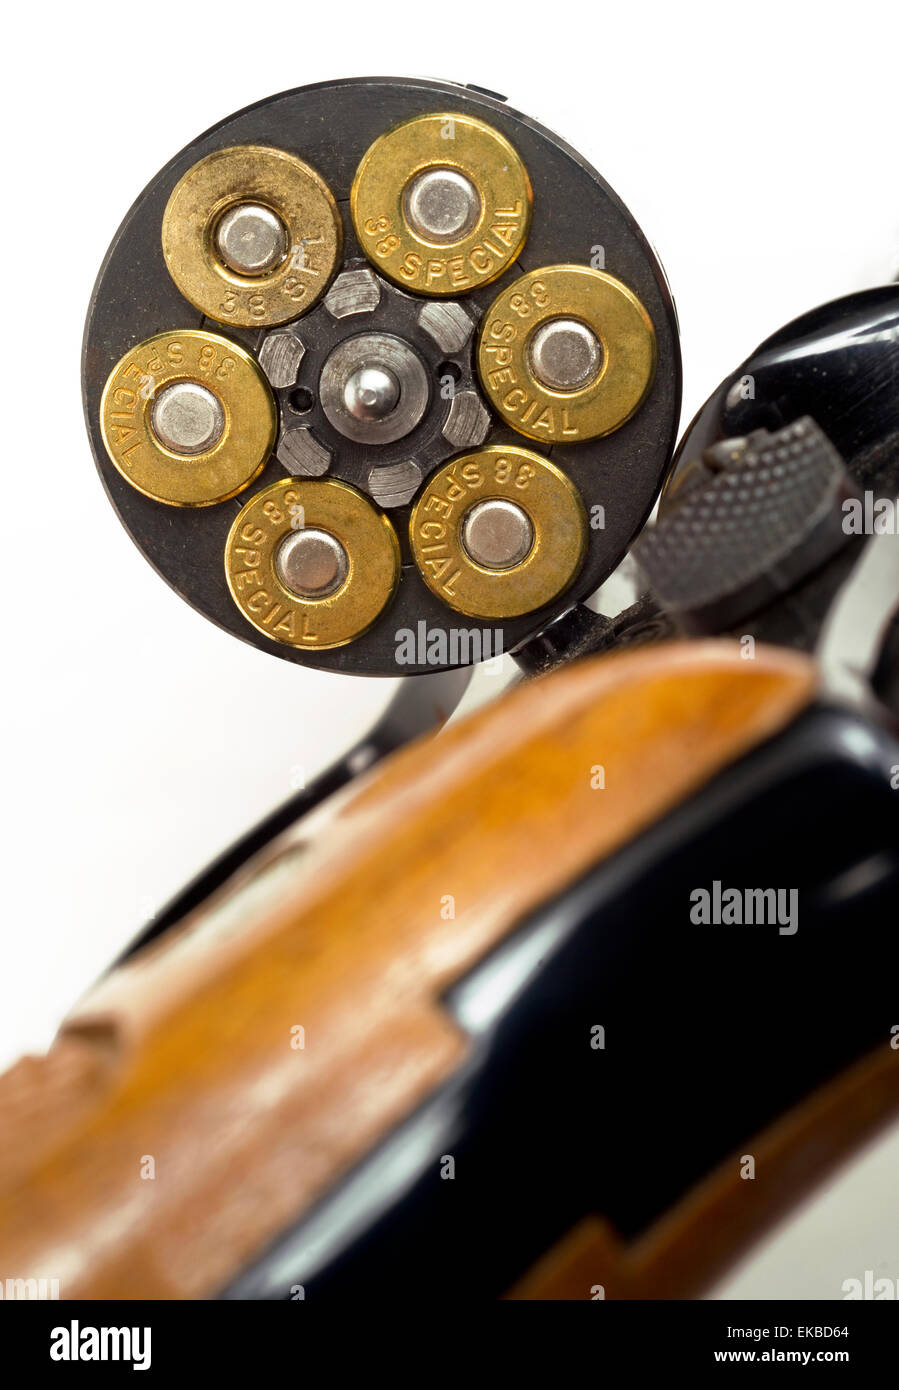 A Classic American Revolver In 38 Special Stock Photo, Picture and Royalty  Free Image. Image 30546724.